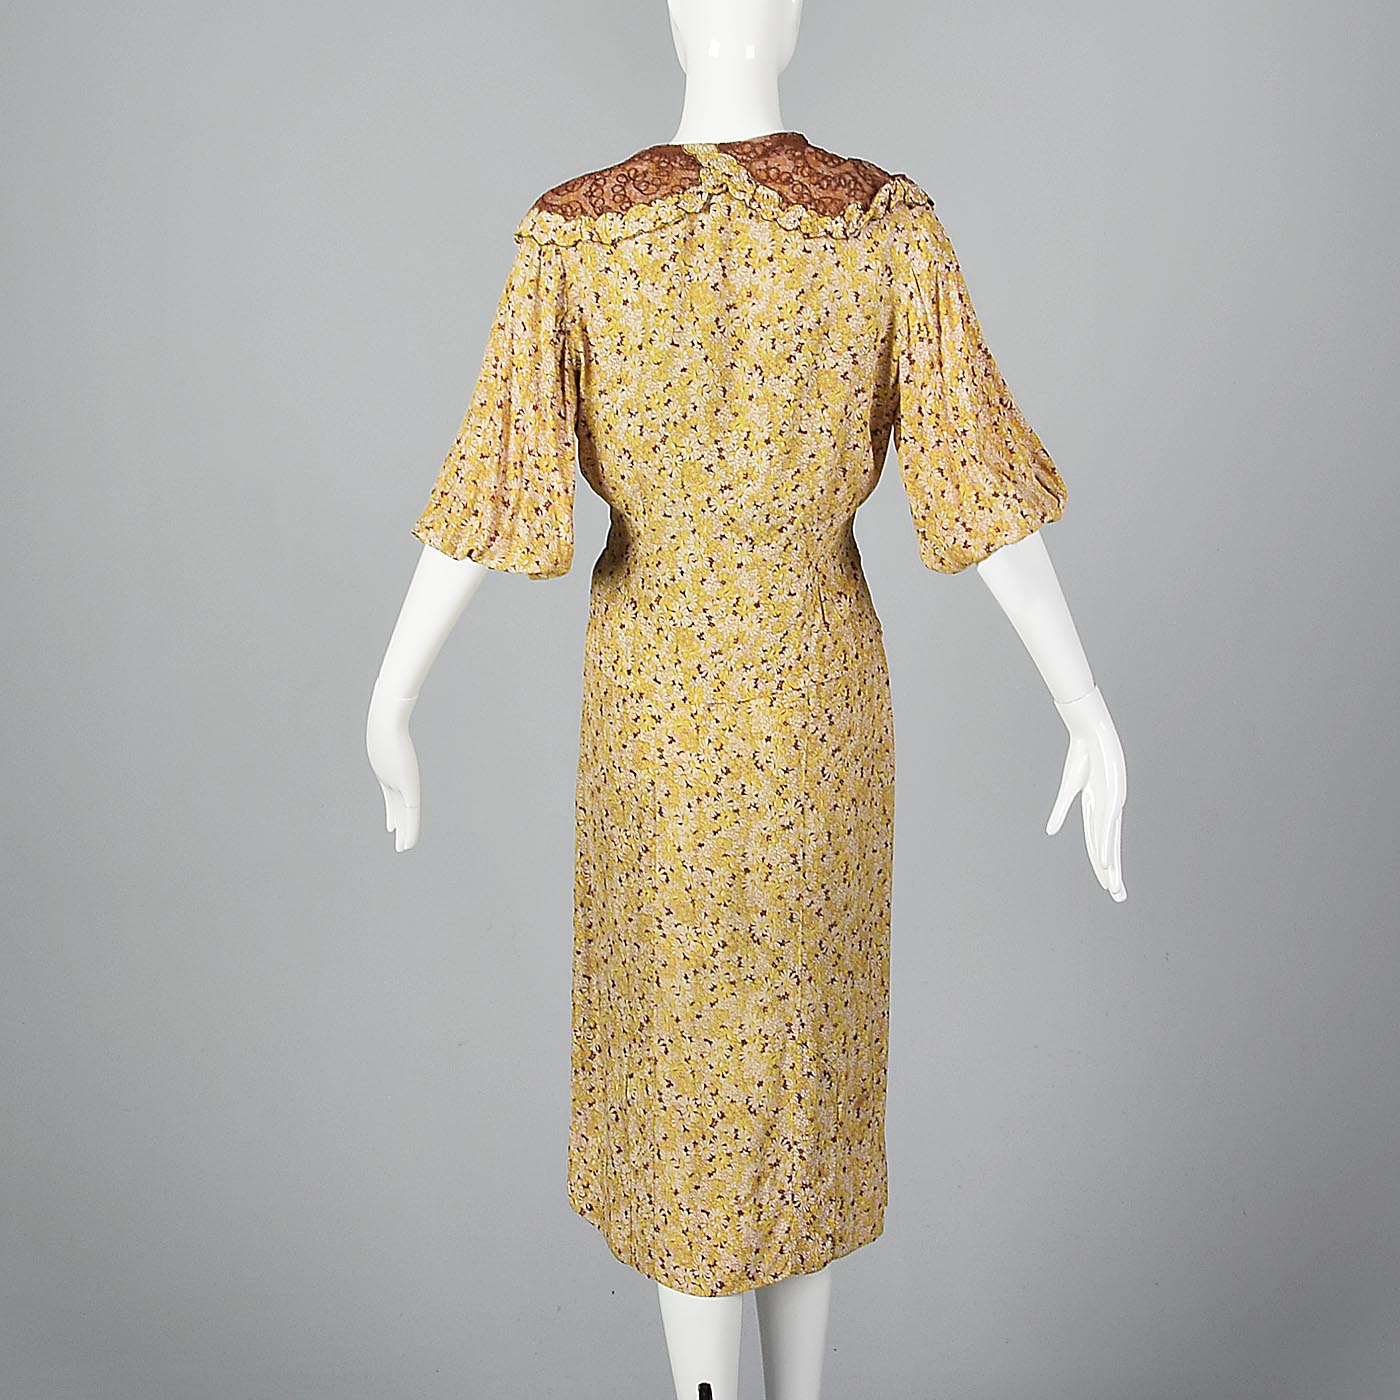 1930s Yellow Floral Dress with Open Sleeve Jacket